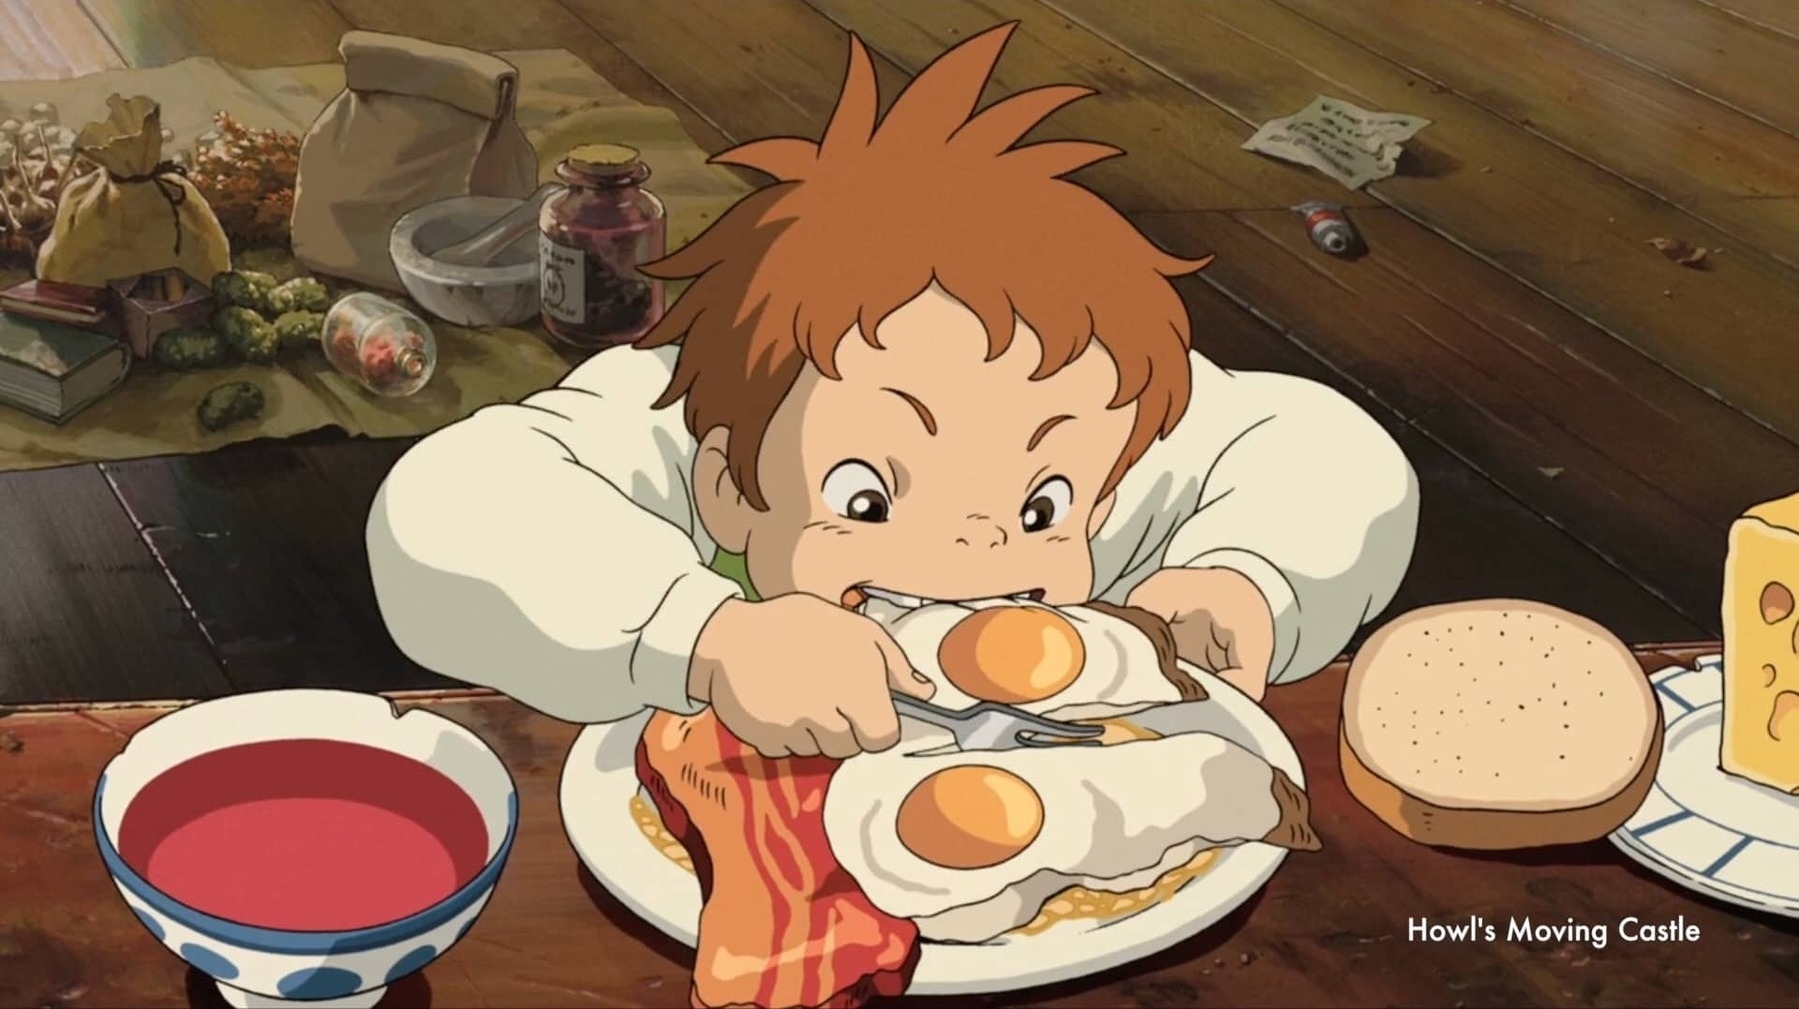 Single frame from the anime Howl’s Moving Castle. The table is set with food: soup, bread, cheese, egg, and meat. A boy gobbles the eggs with enthusiasm.